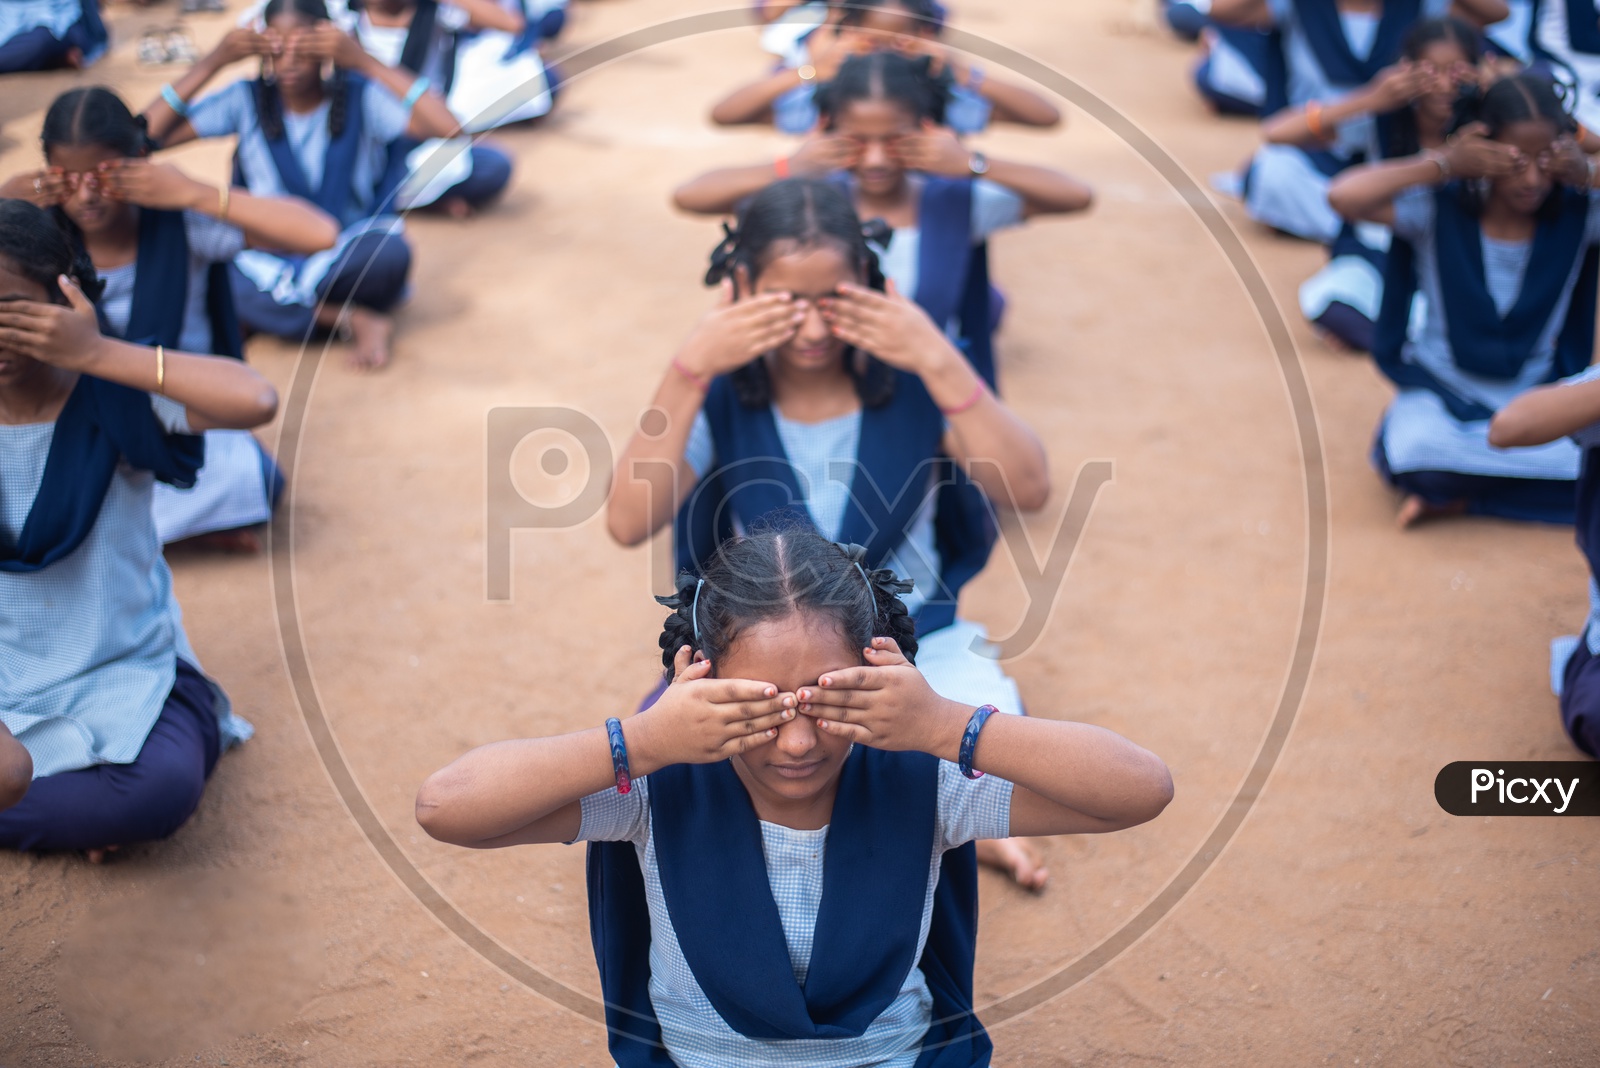 Students in a Government School Practicing Yoda in their Drill Period